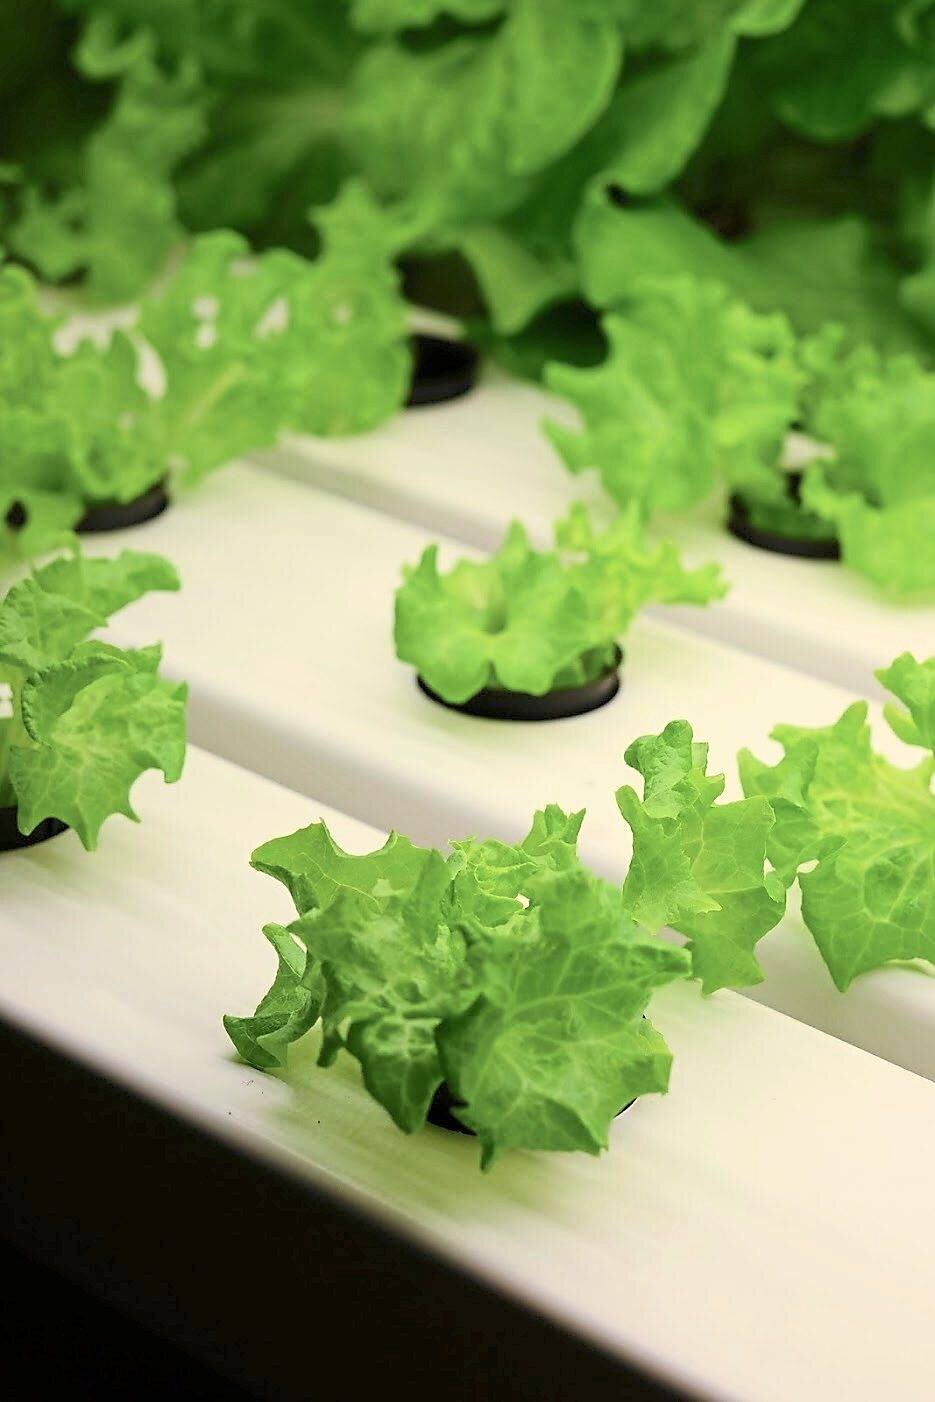 In vertical farming, plants like vegetables, herbs and fruits are grown in a highly-controlled environment.